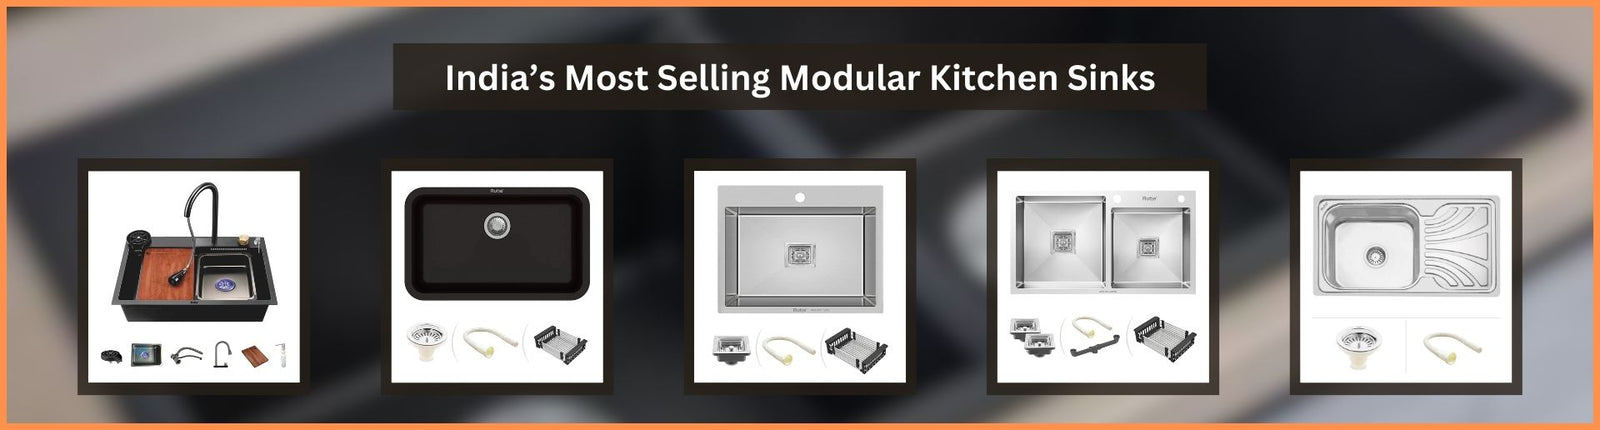 India’s Most Selling Modular Kitchen Sinks